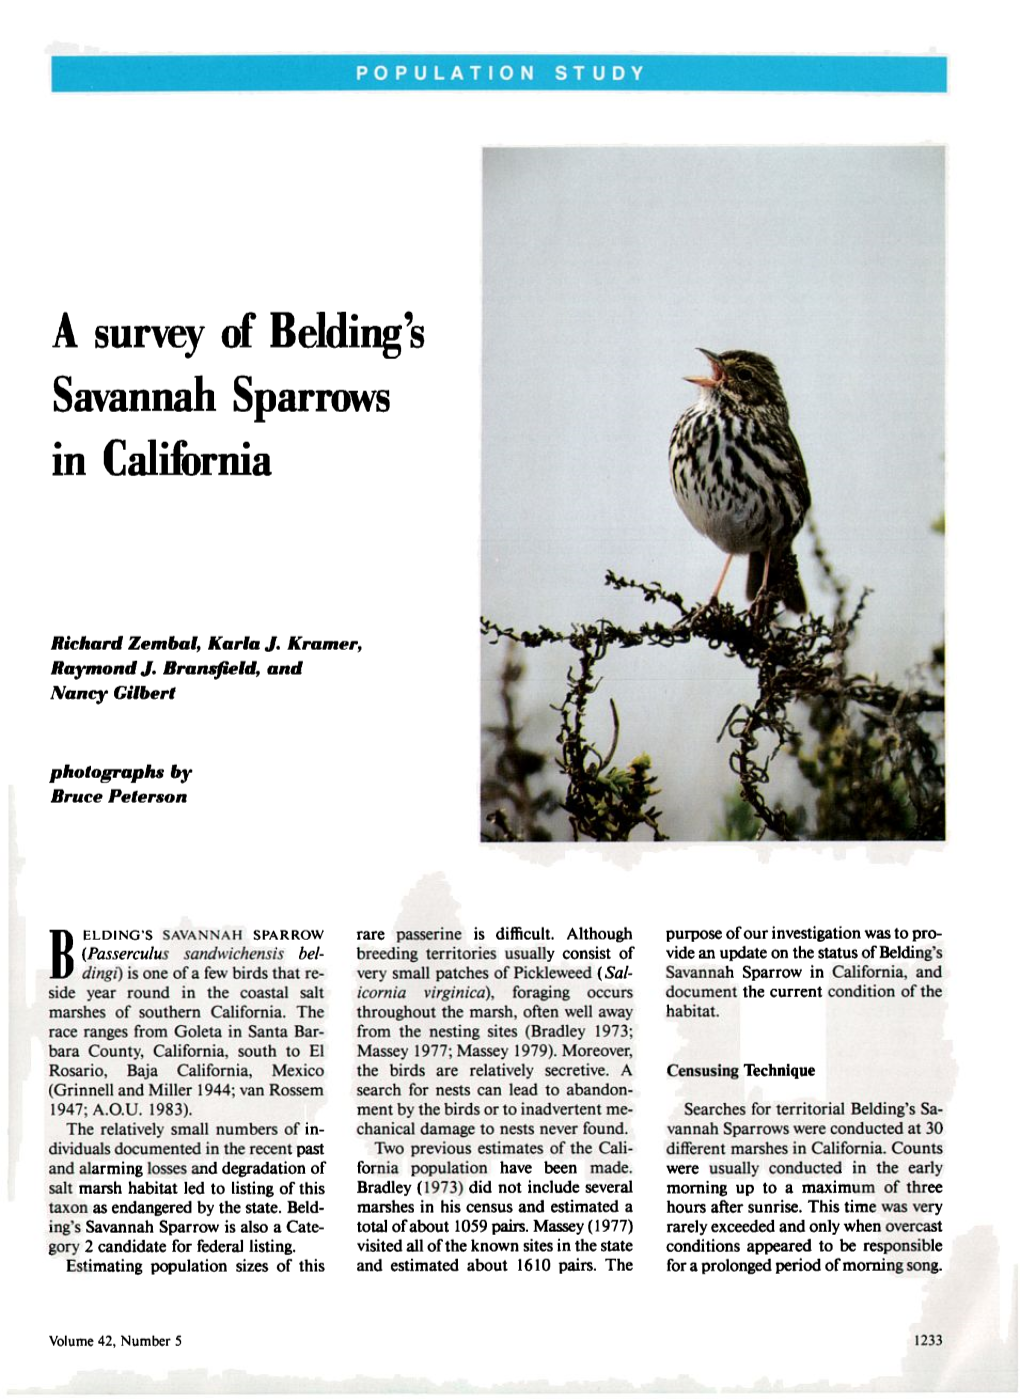 S Savannah Sparrows in California in 1986, Ritory Holders,Where the Spacingof Sev- Compared to Two Previous Censuses